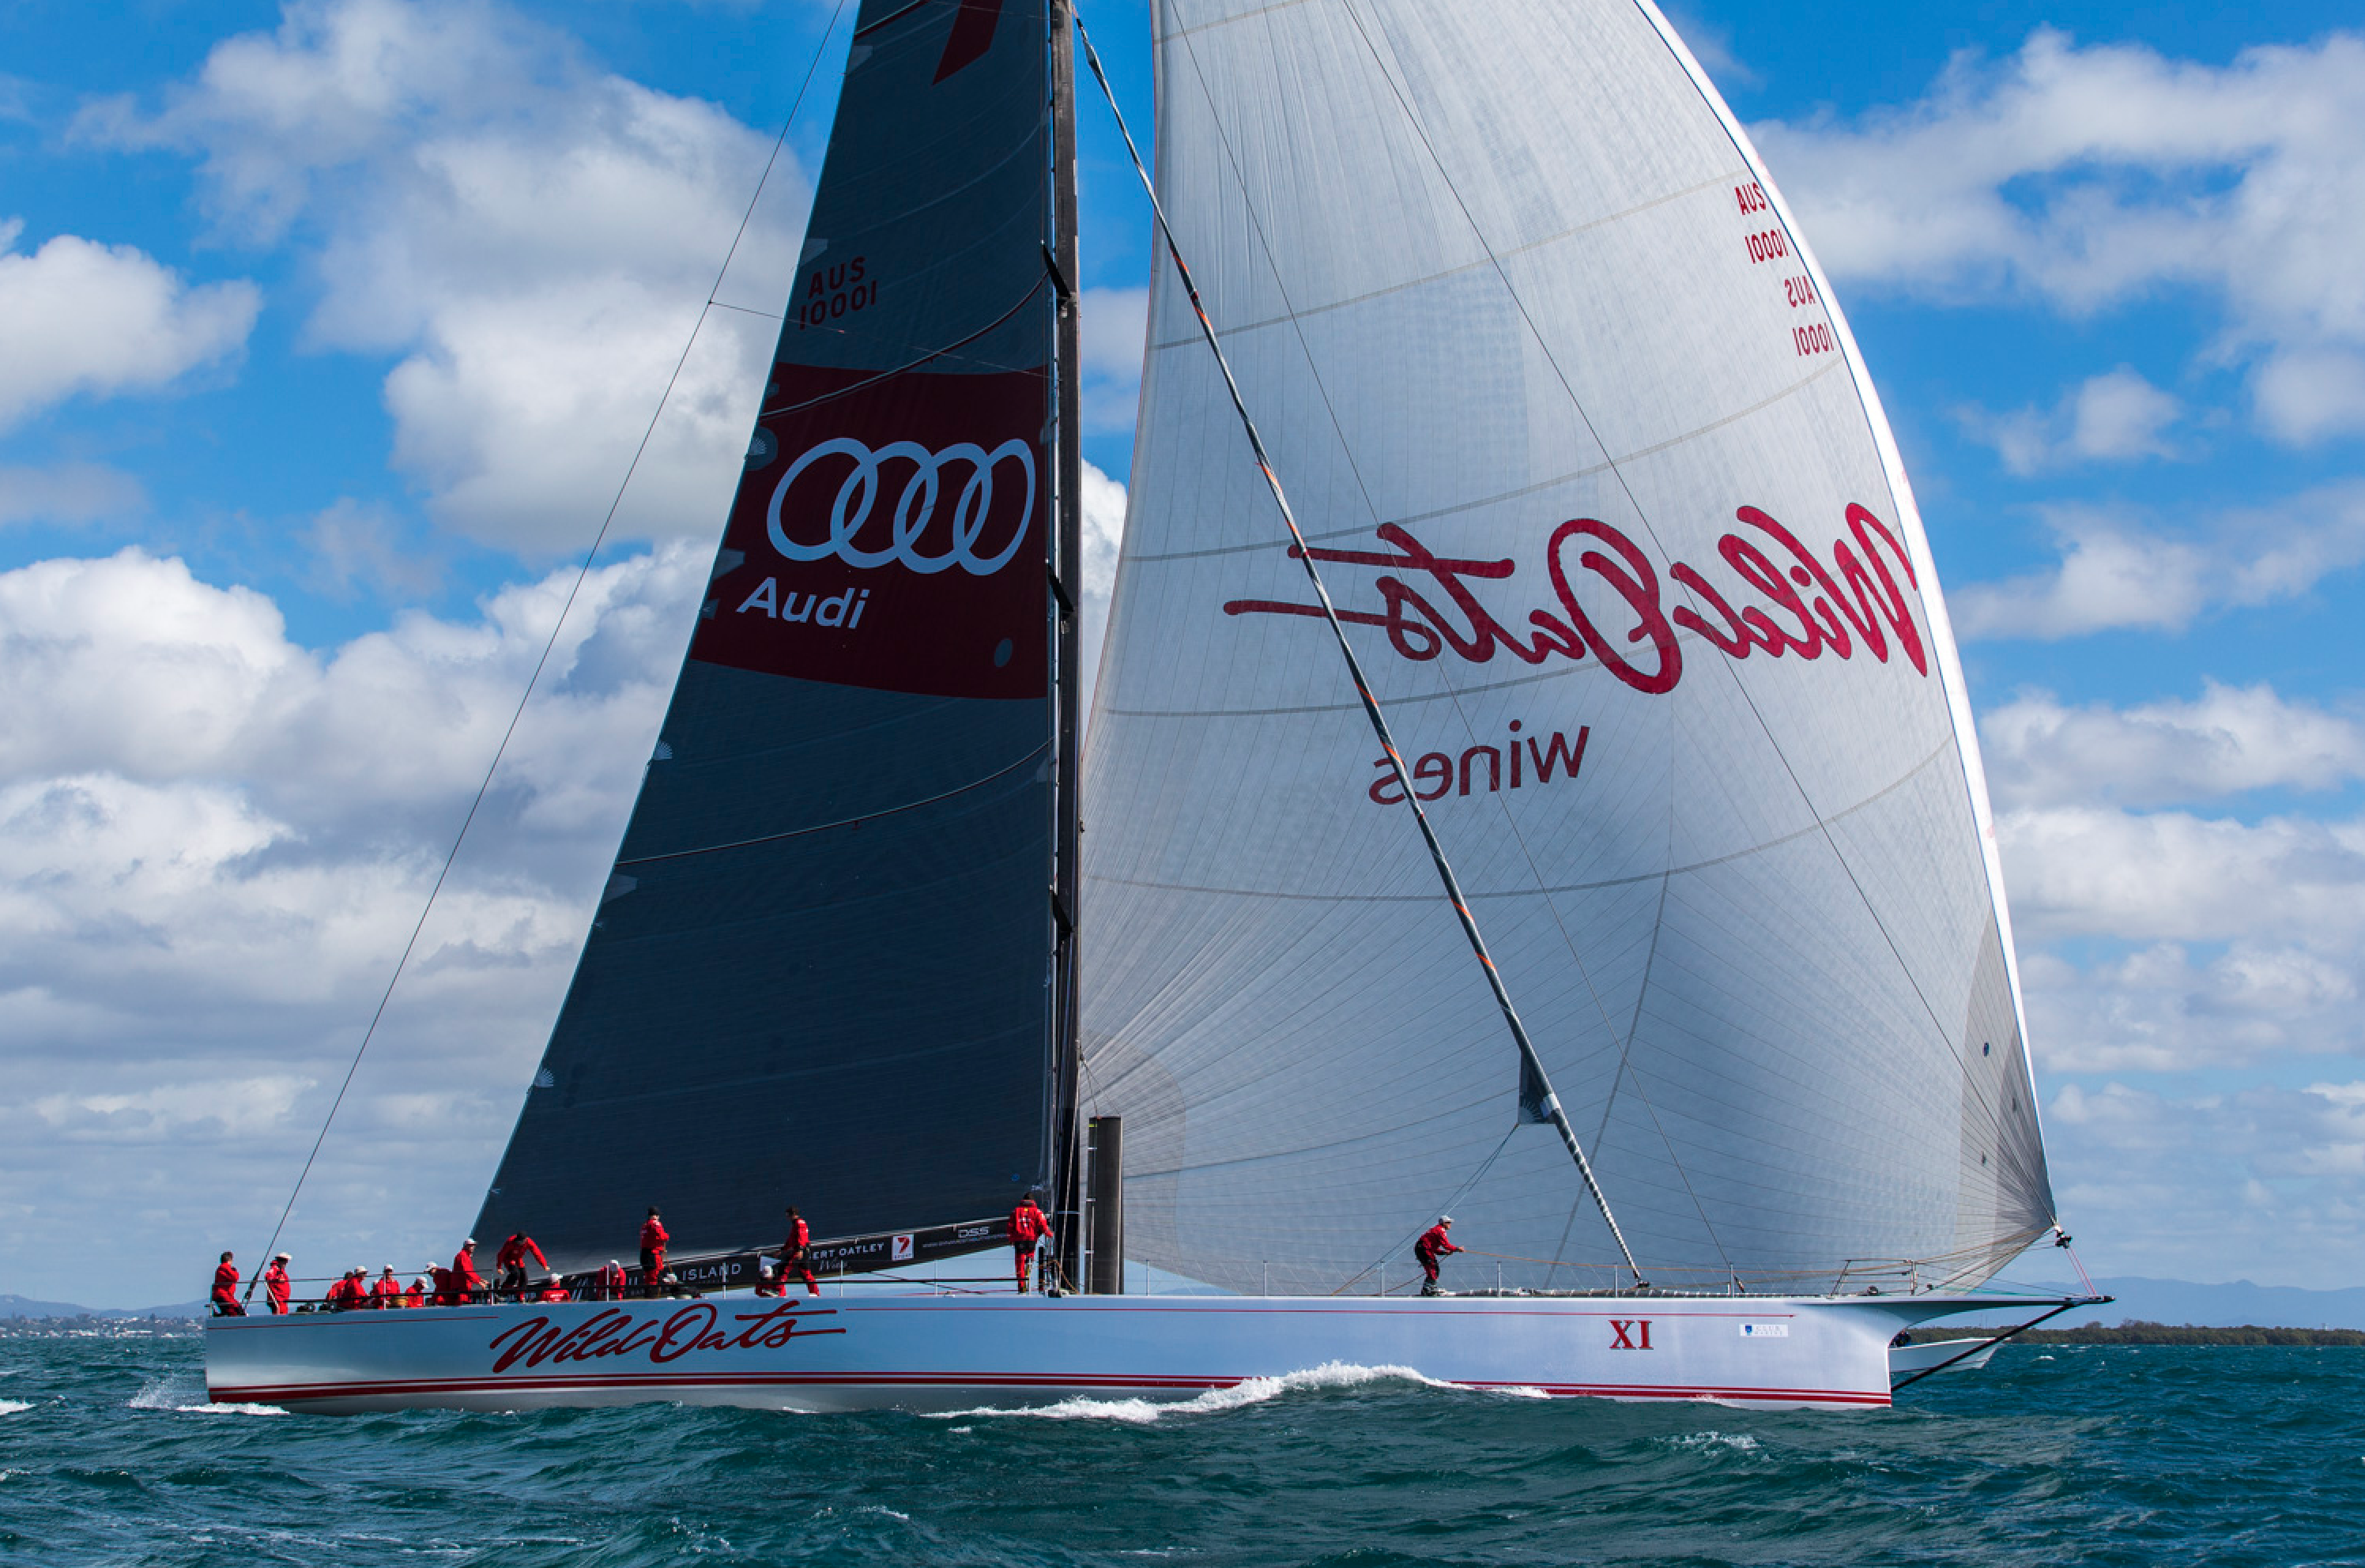 Another modification for Wild Oats XI in preparation for the Rolex Sydney Hobart Race